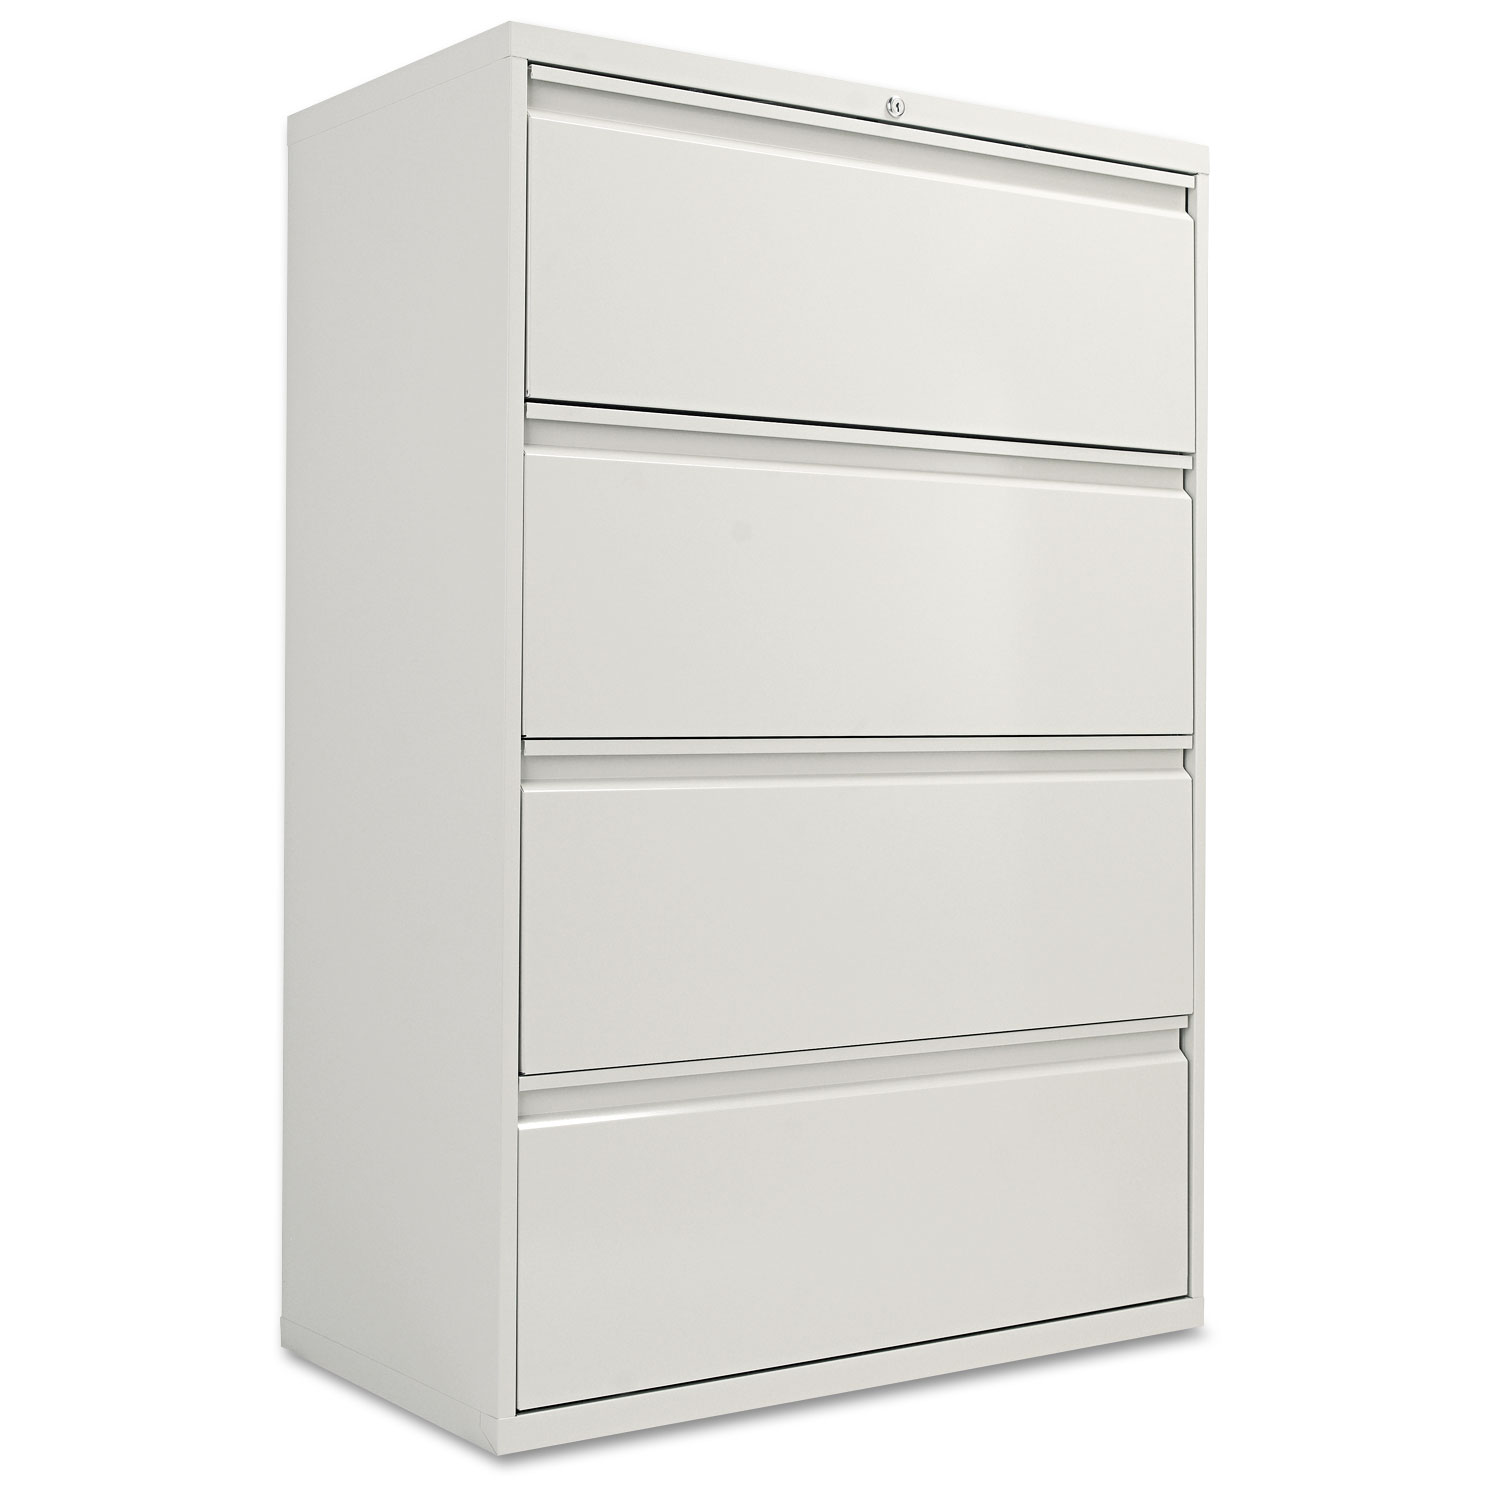 Alera Four-drawer Lateral File Cabinet, 36w X 18d X 52.5h, Light Gray - image 1 of 3